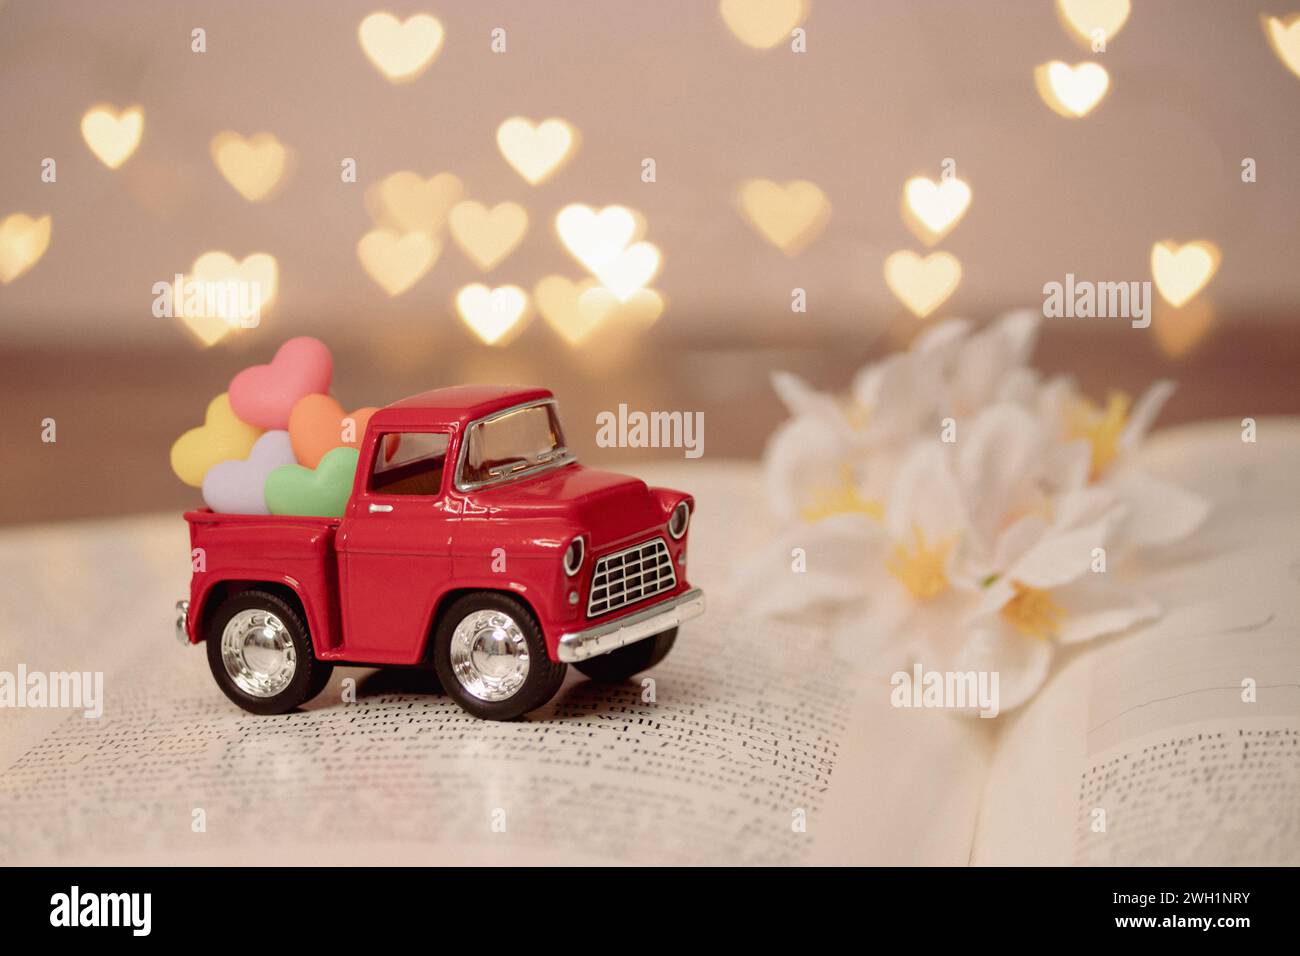 red truck carry colorful heart in the back of the pickup for delivery love on Valentine's day, on blur novel book with page spread out, heart bokeh Stock Photo